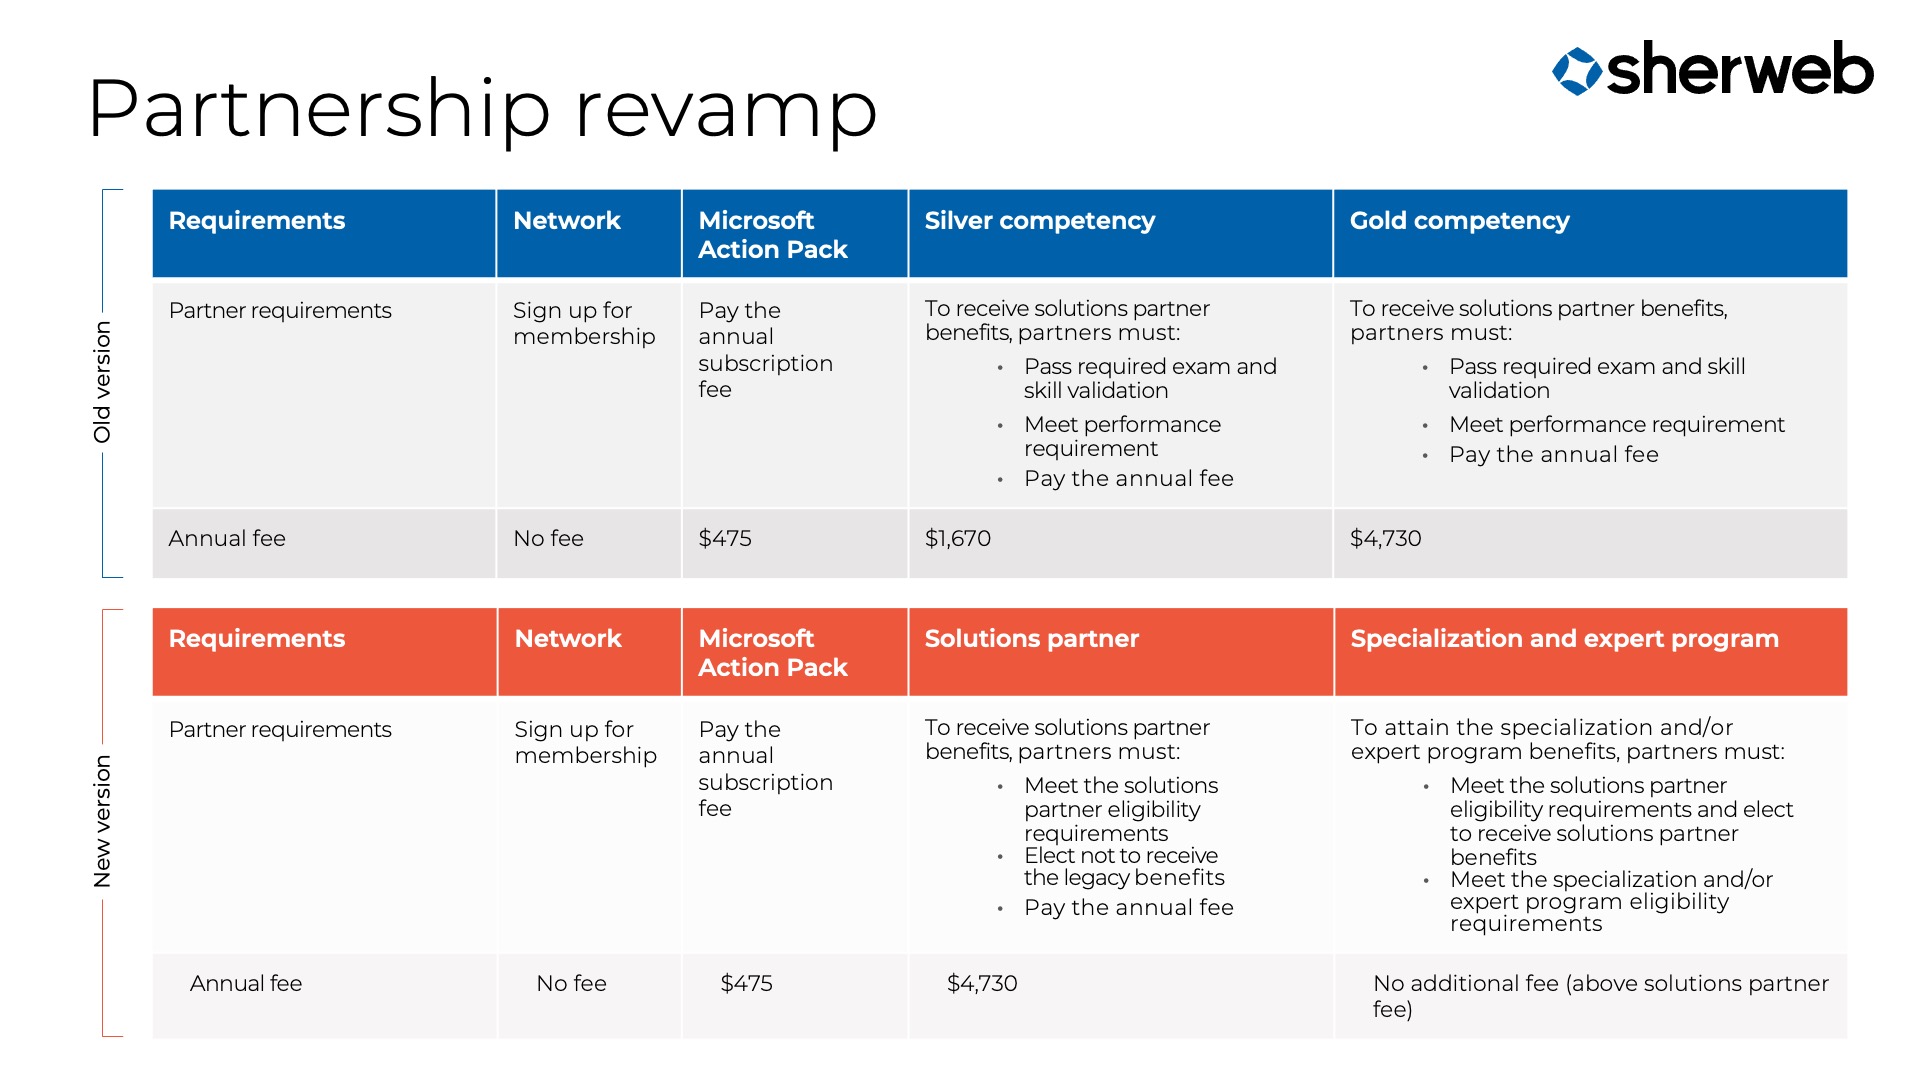 Table outlining the differences between the old and new Microsoft partner programs